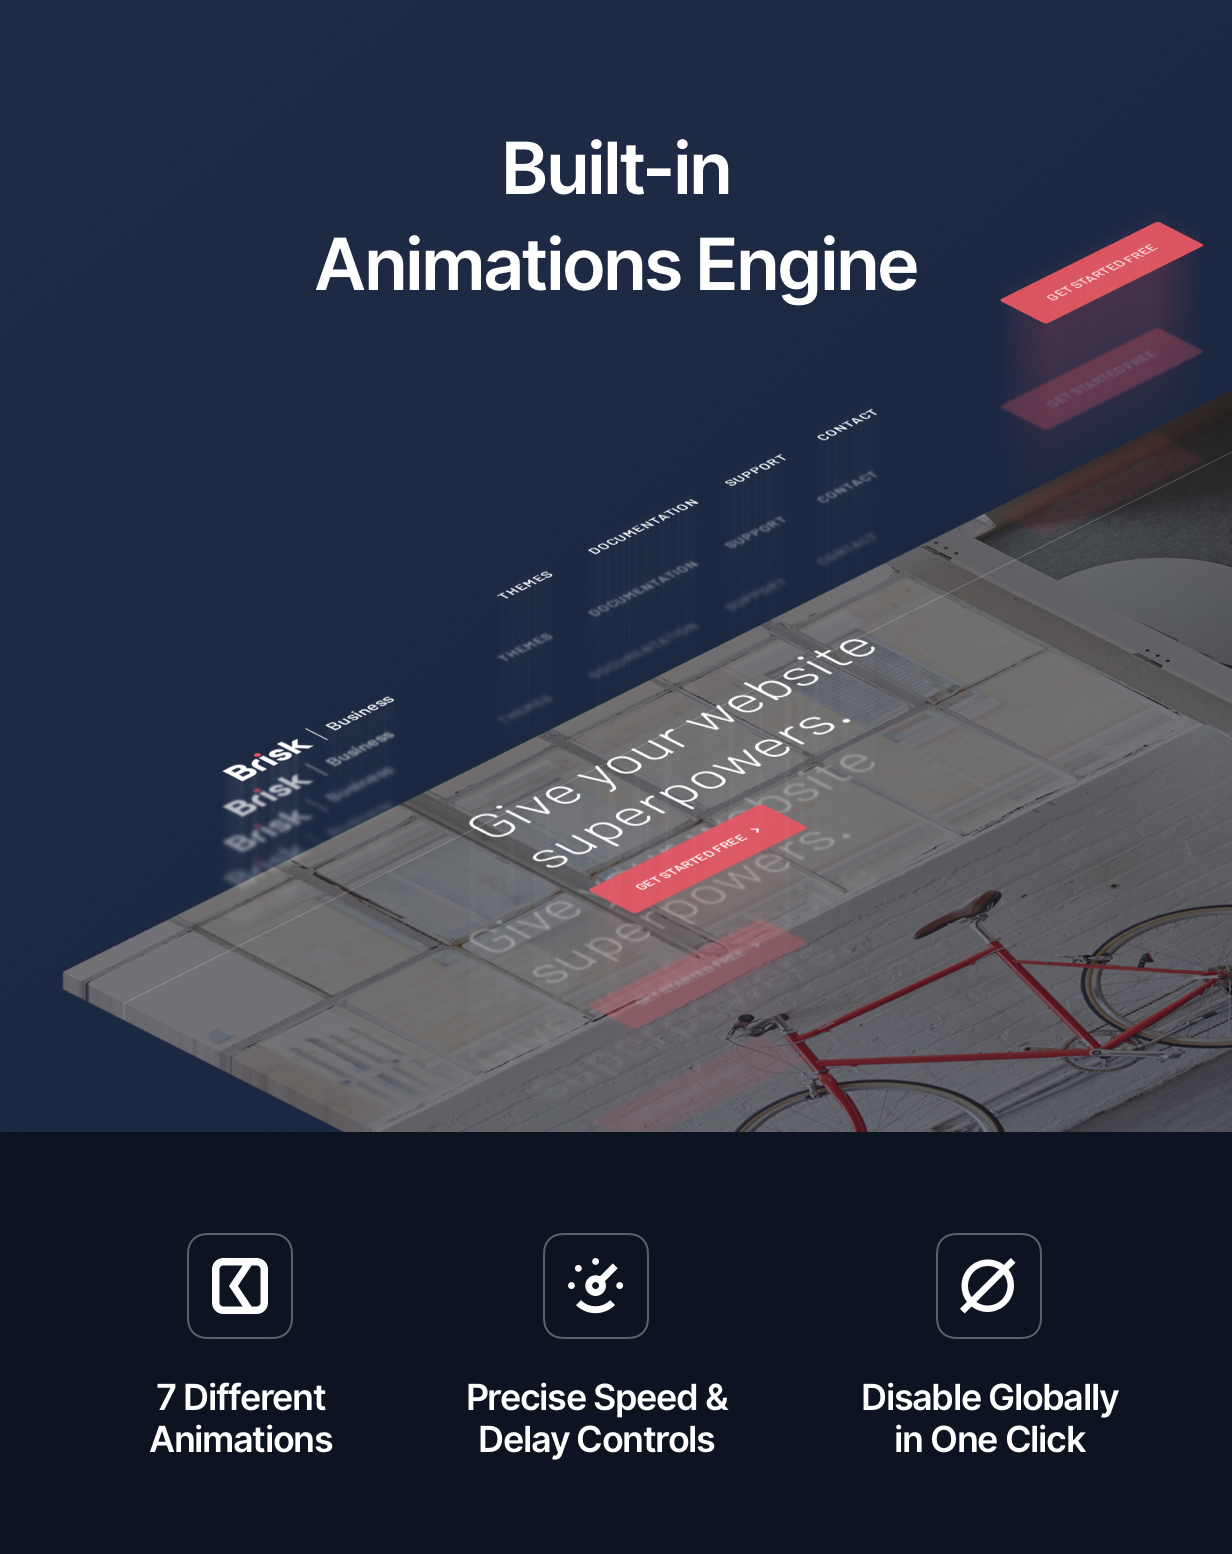 Built-in animations engine.